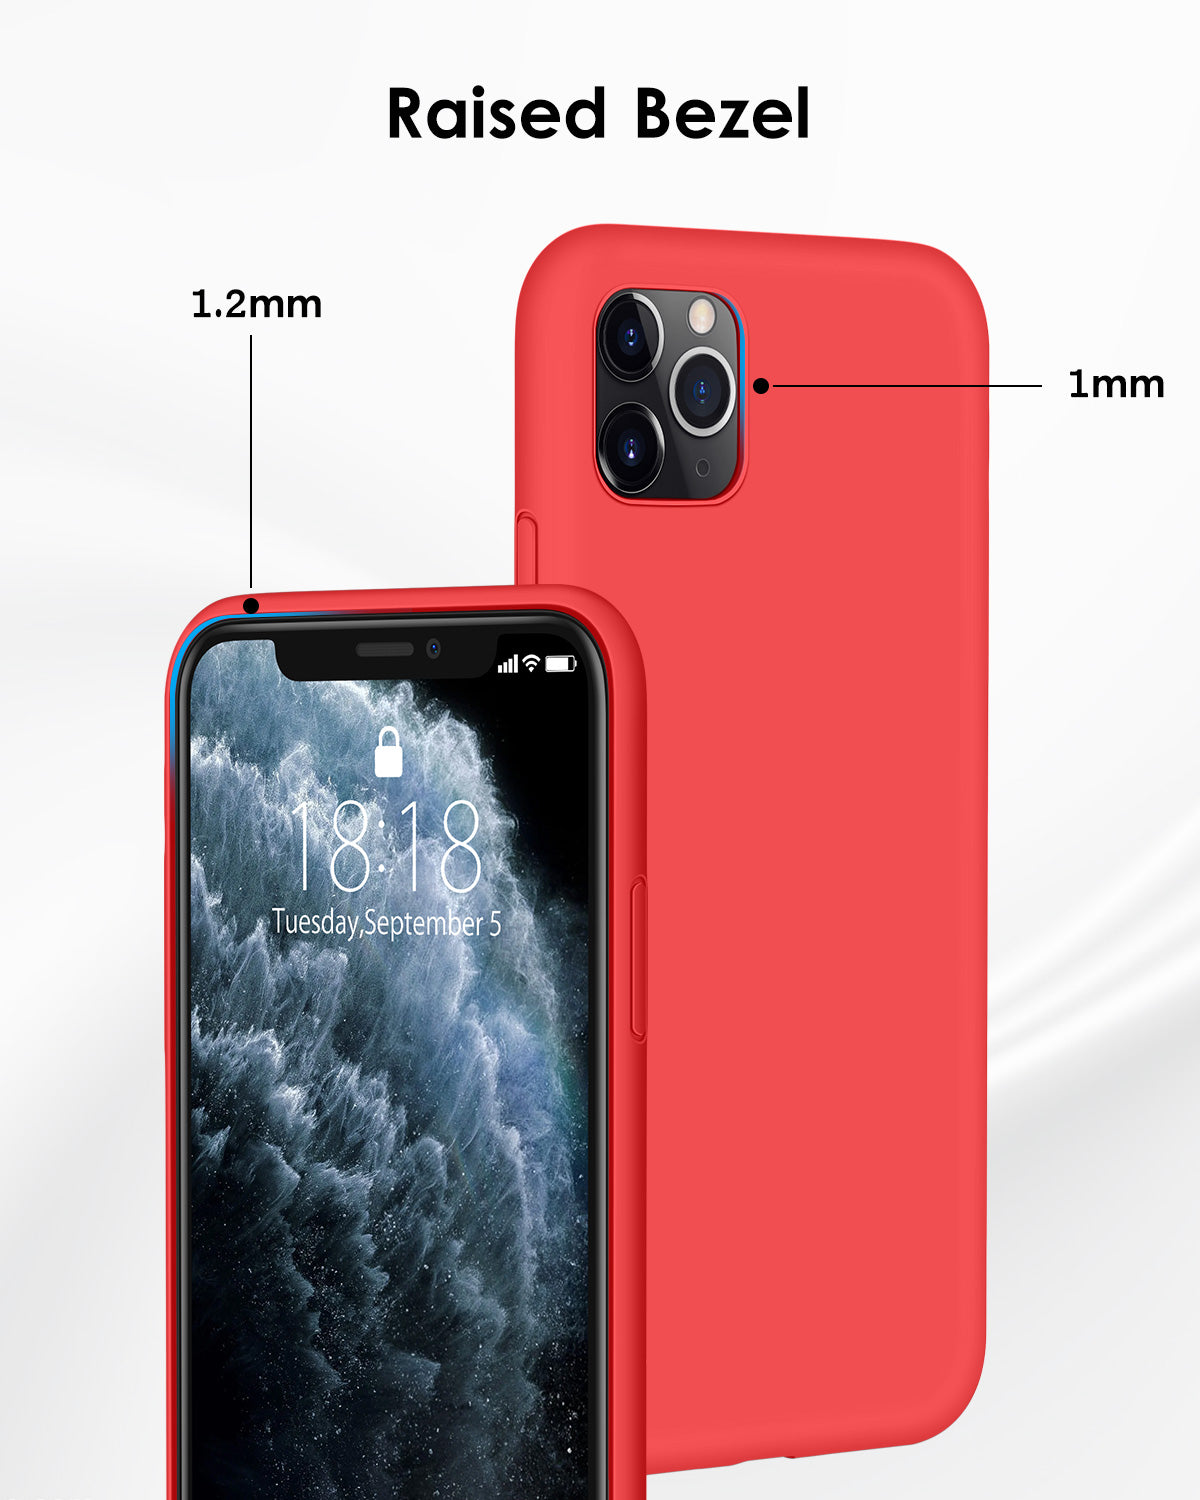 DTTO Compatible with iPhone 11 Pro Case, [Romance Series] Full Covered Silicone Cover [Enhanced Camera and Screen Protection] with Honeycomb Grid Cushion for iPhone 11 Pro 5.8" 2019, American Red